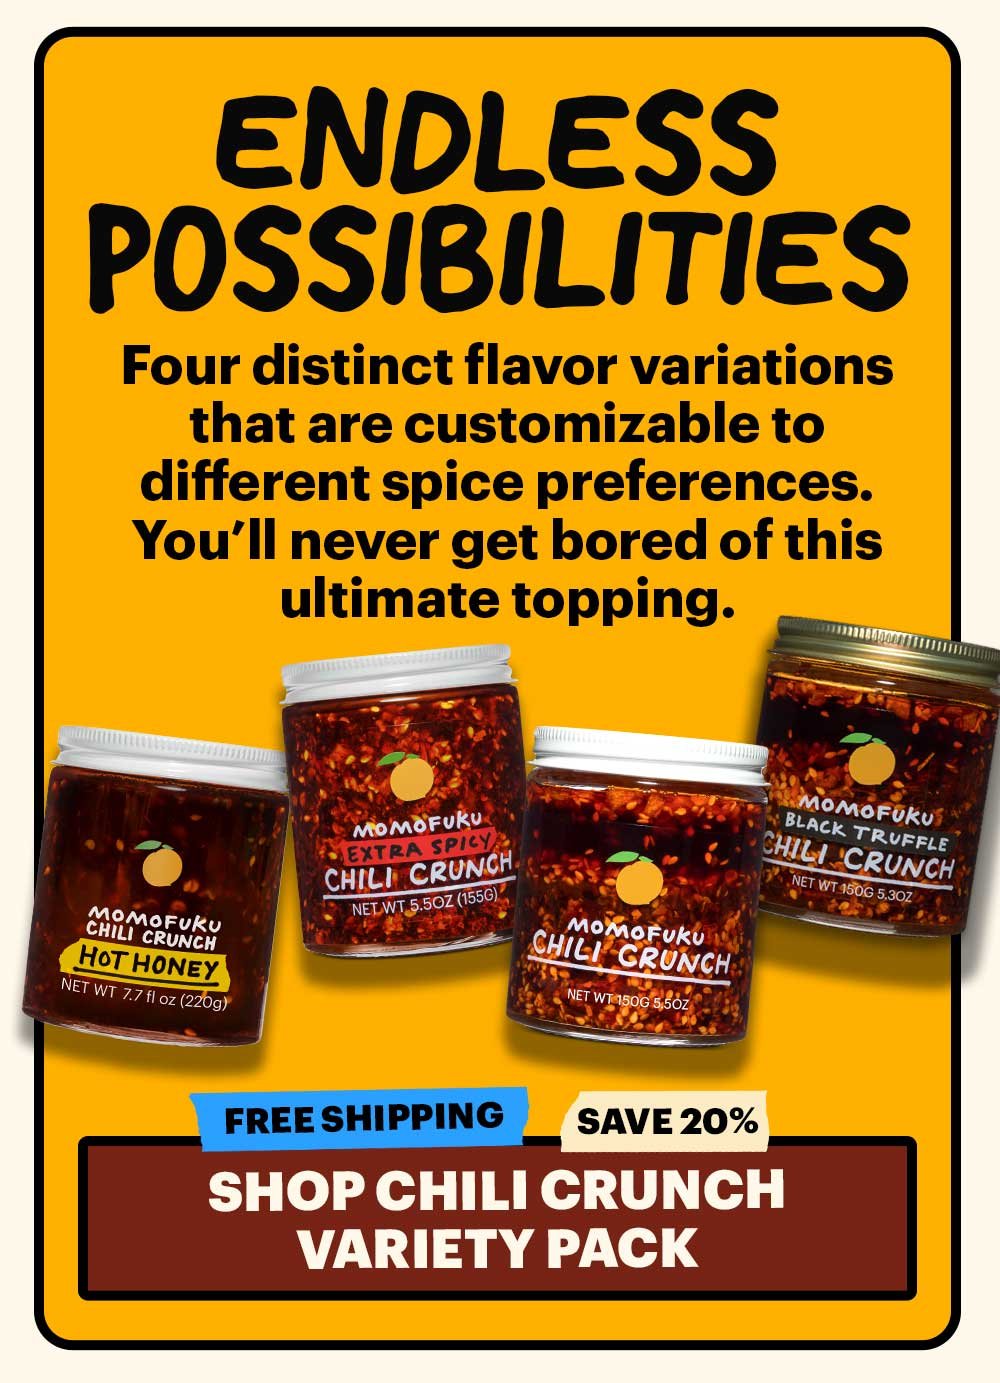 ENDLESS POSSIBILITIES. Four distinct flavor variations that are customizable to different spice preferences. You'll never get bored of this ultimate topping. FREE SHIPPING, SAVE 20%: SHOP CHILI CRUNCH VARIETY PACK